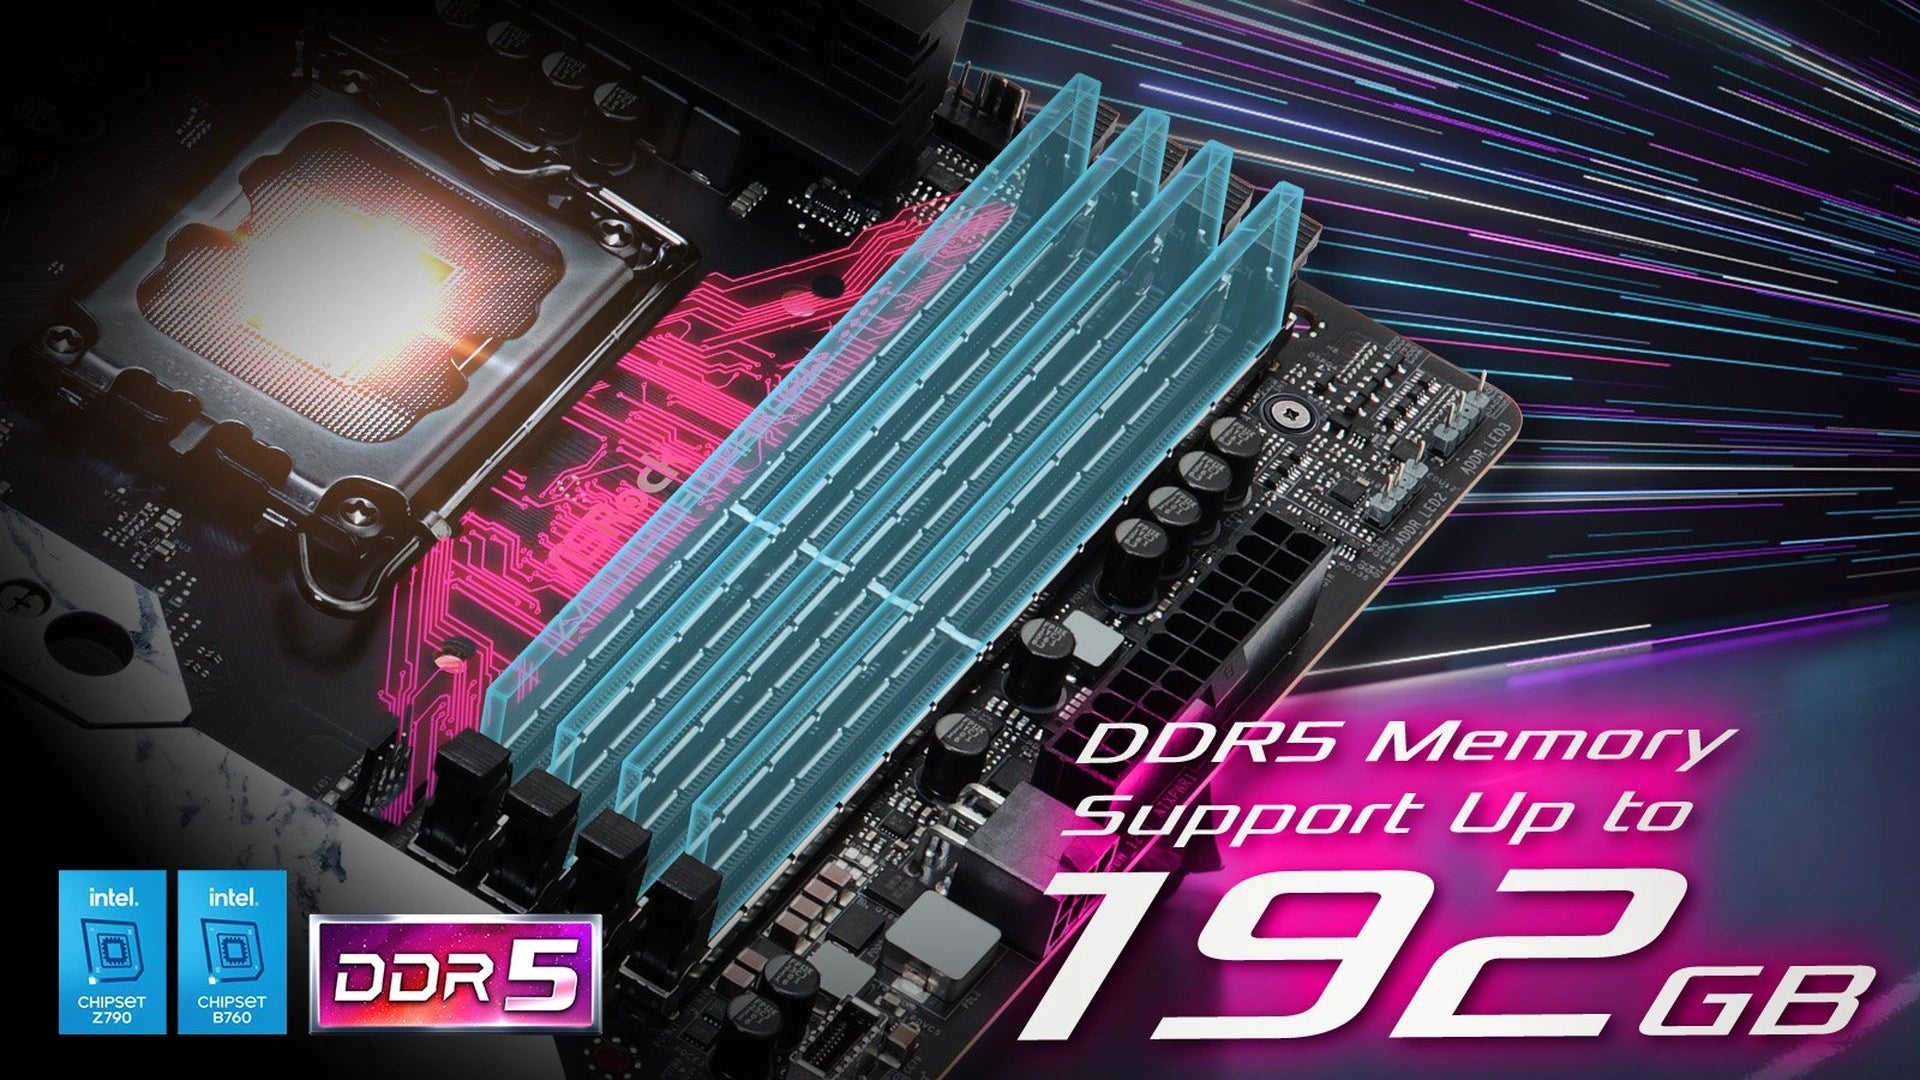 ASRock Intel® 700/600 Series Motherboards Now Support Memory Capacity up to 192GB! - Vektra Computers LLC